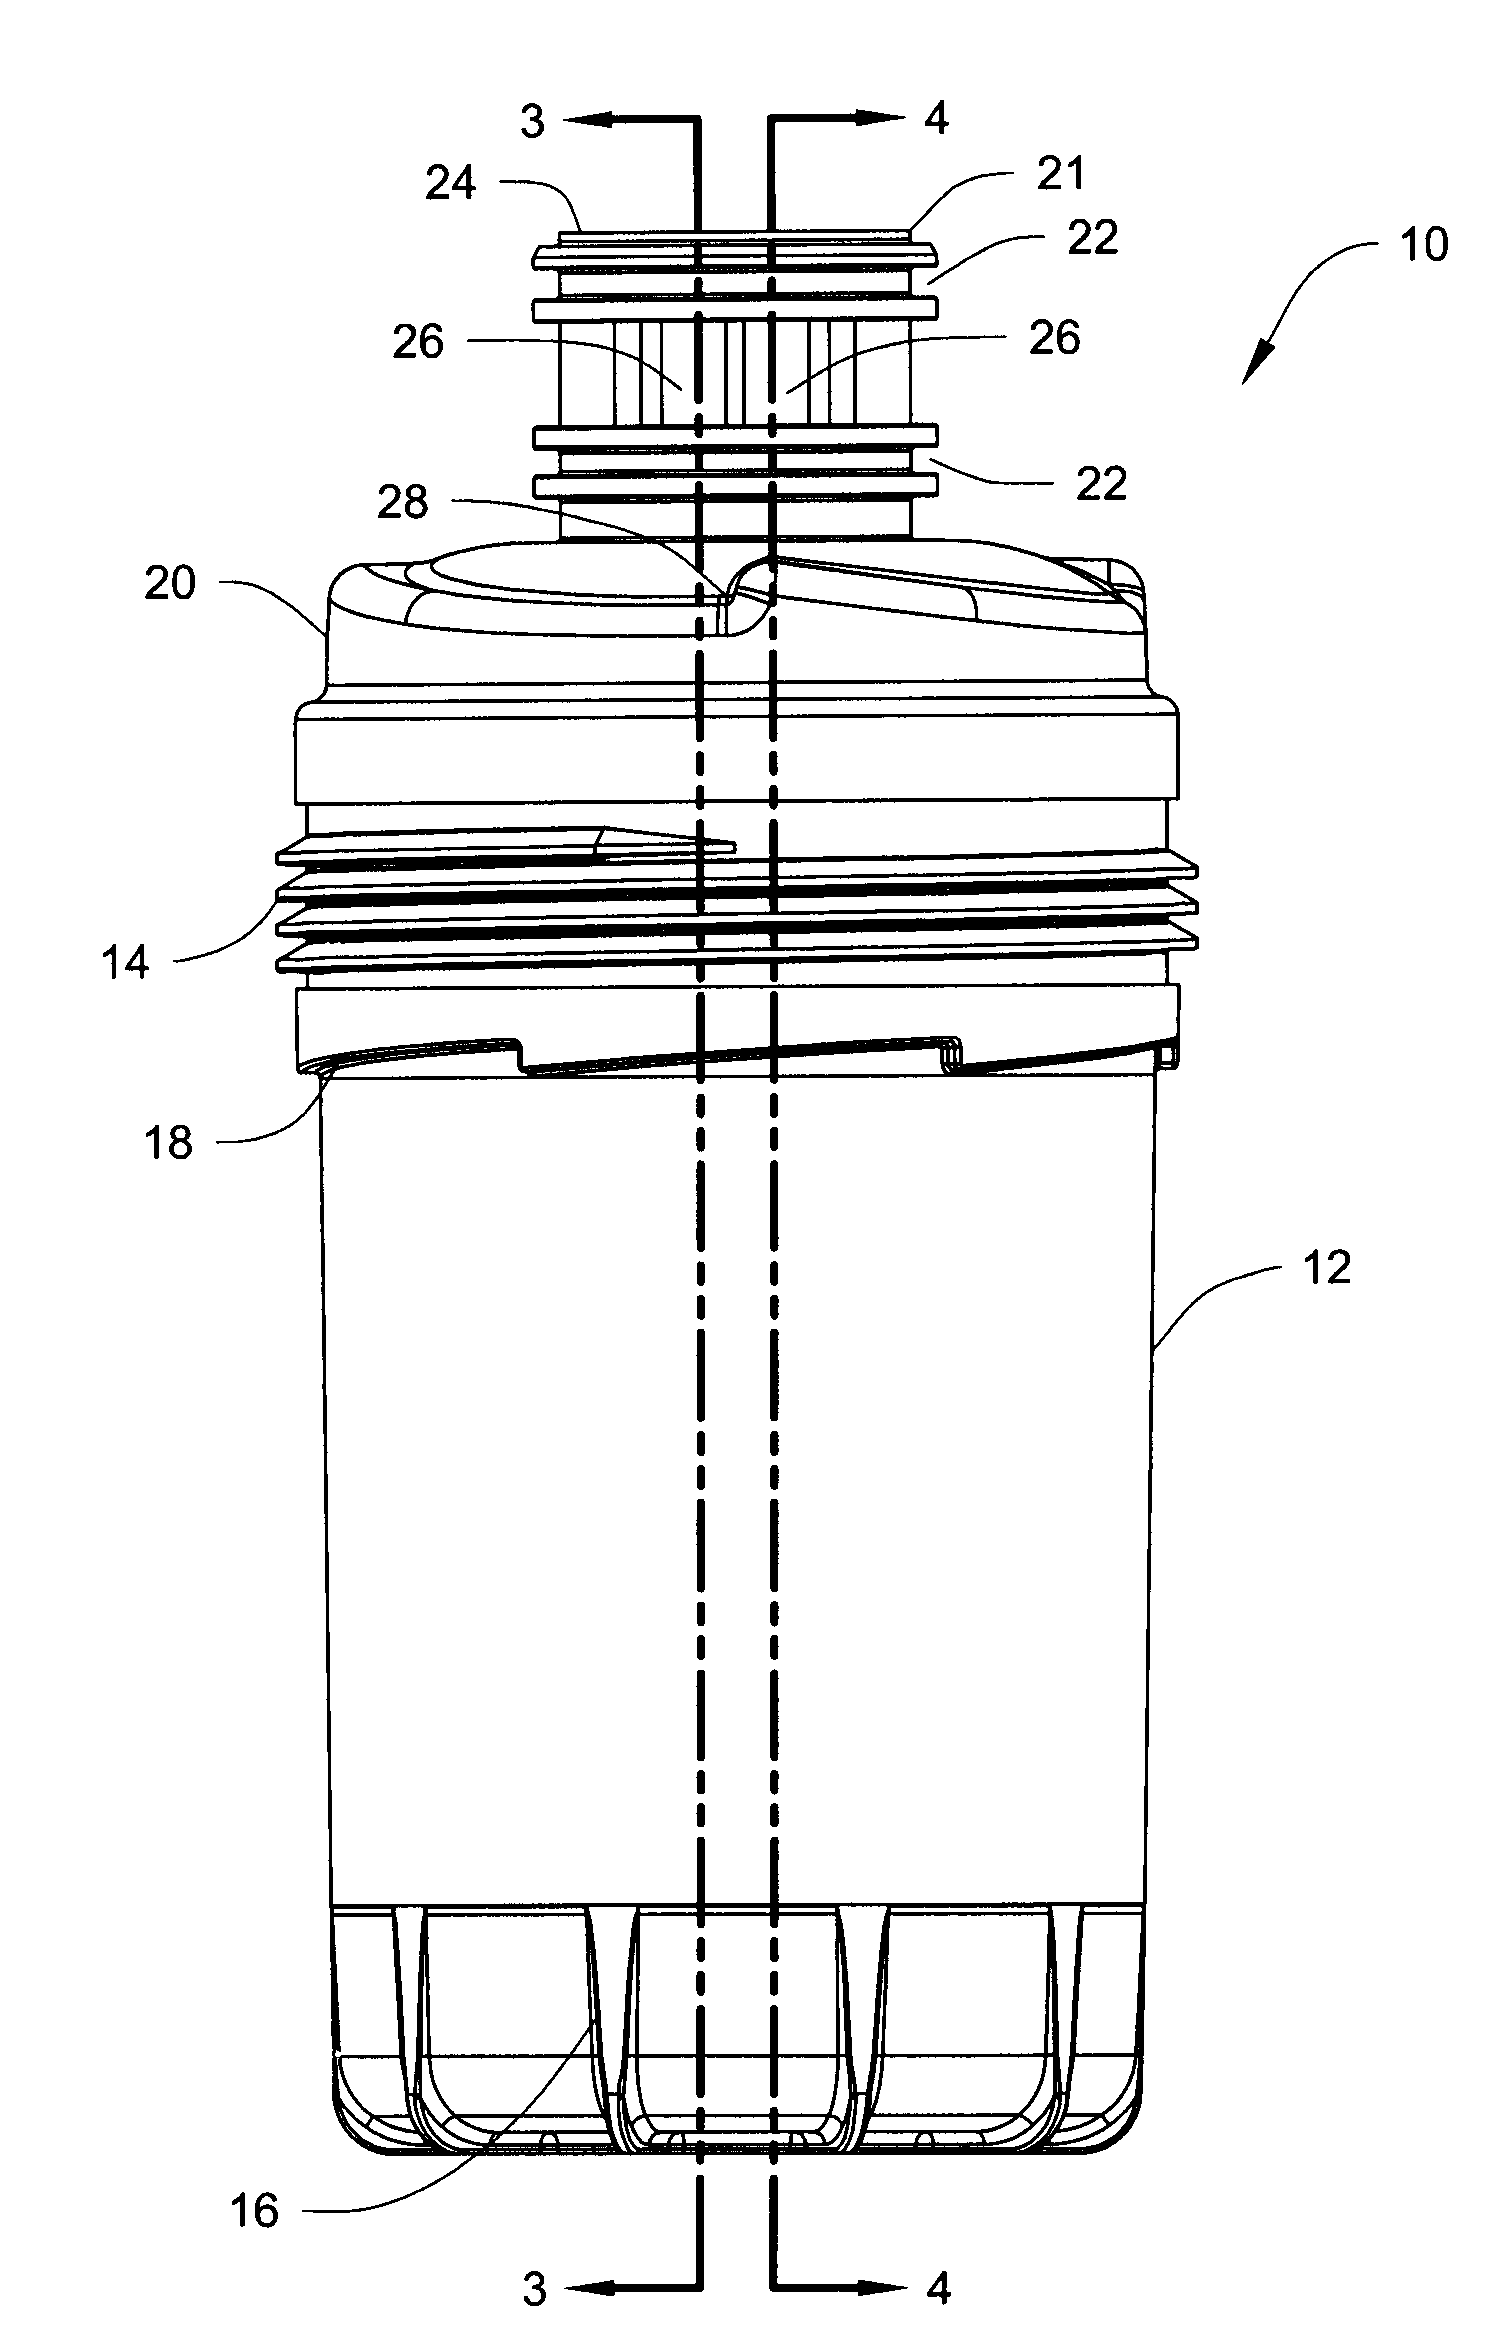 Fluid filter with localized flow attachment